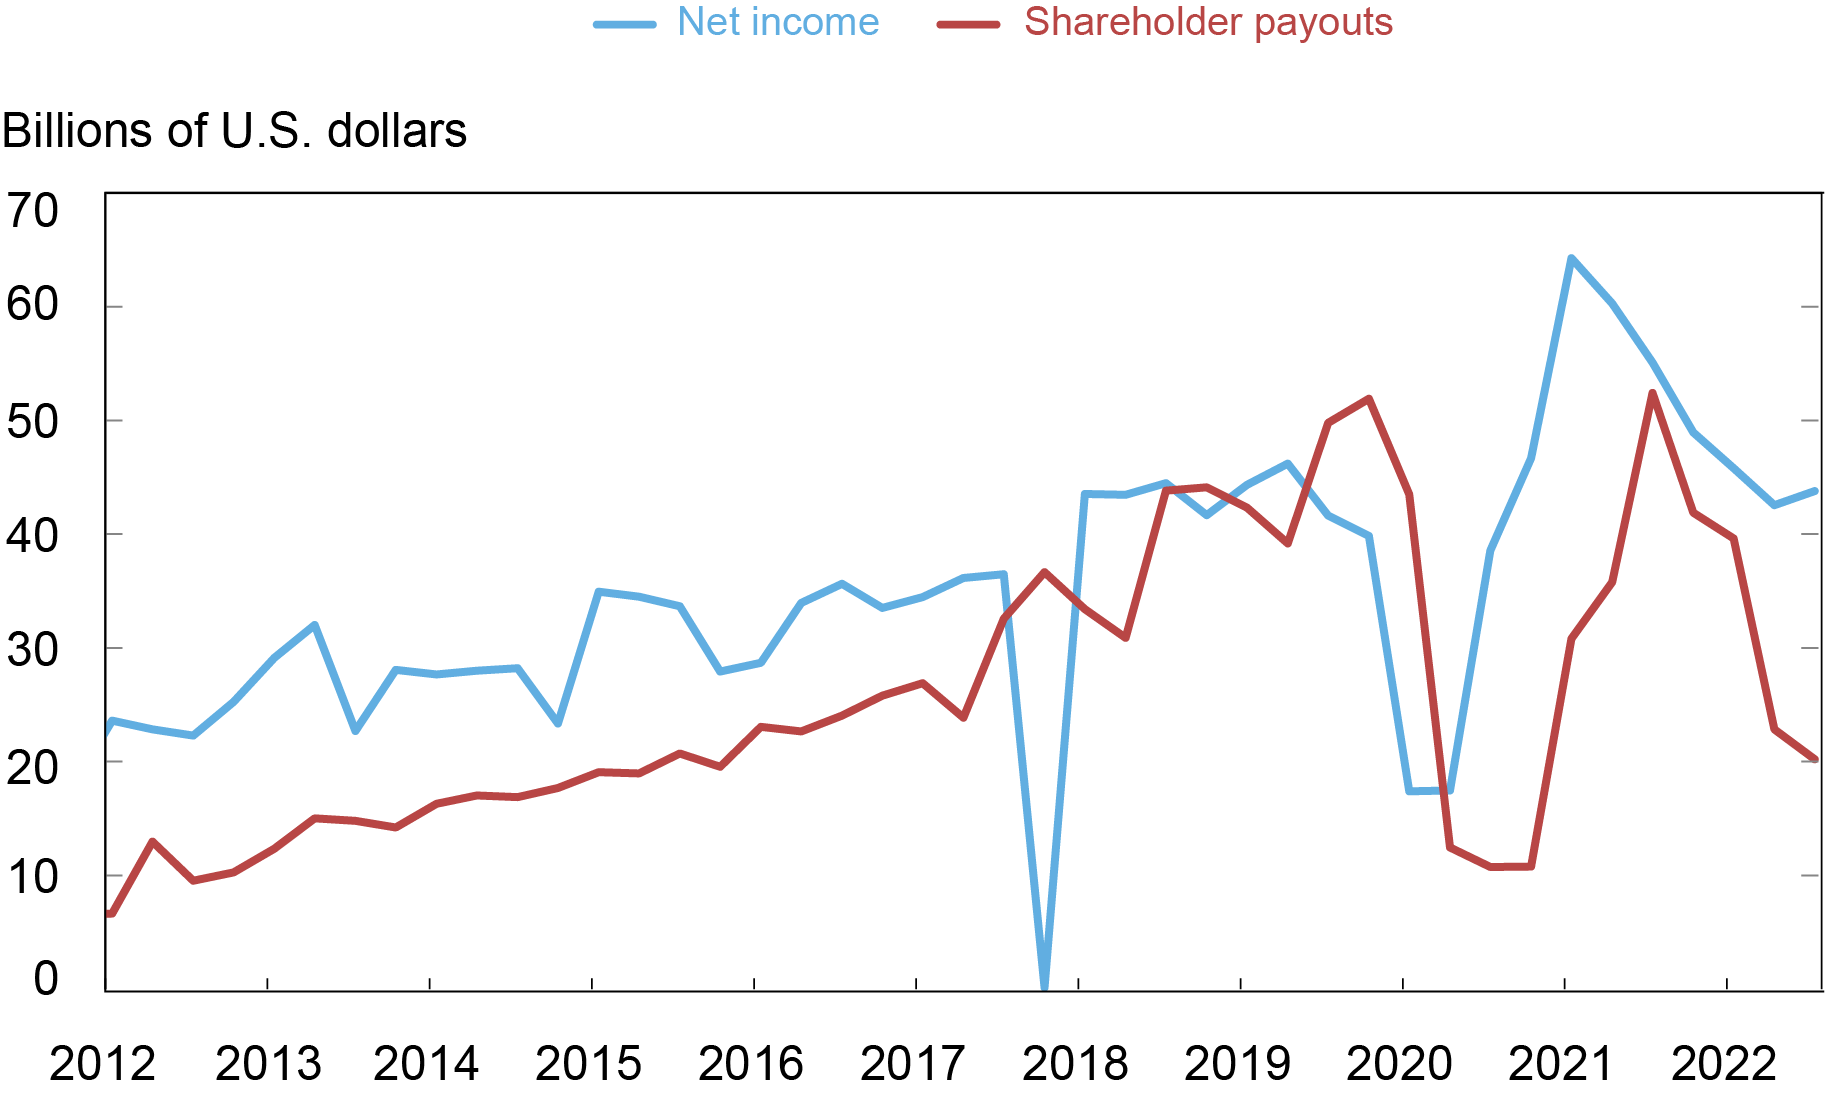 Liberty Street Economics chart showing the relationship between after-tax net income and shareholder payouts between 2012 and the third quarter of 2022 for a set of large bank holding companies subject to the Federal Reserve’s payout restrictions during the COVID-19 pandemic.